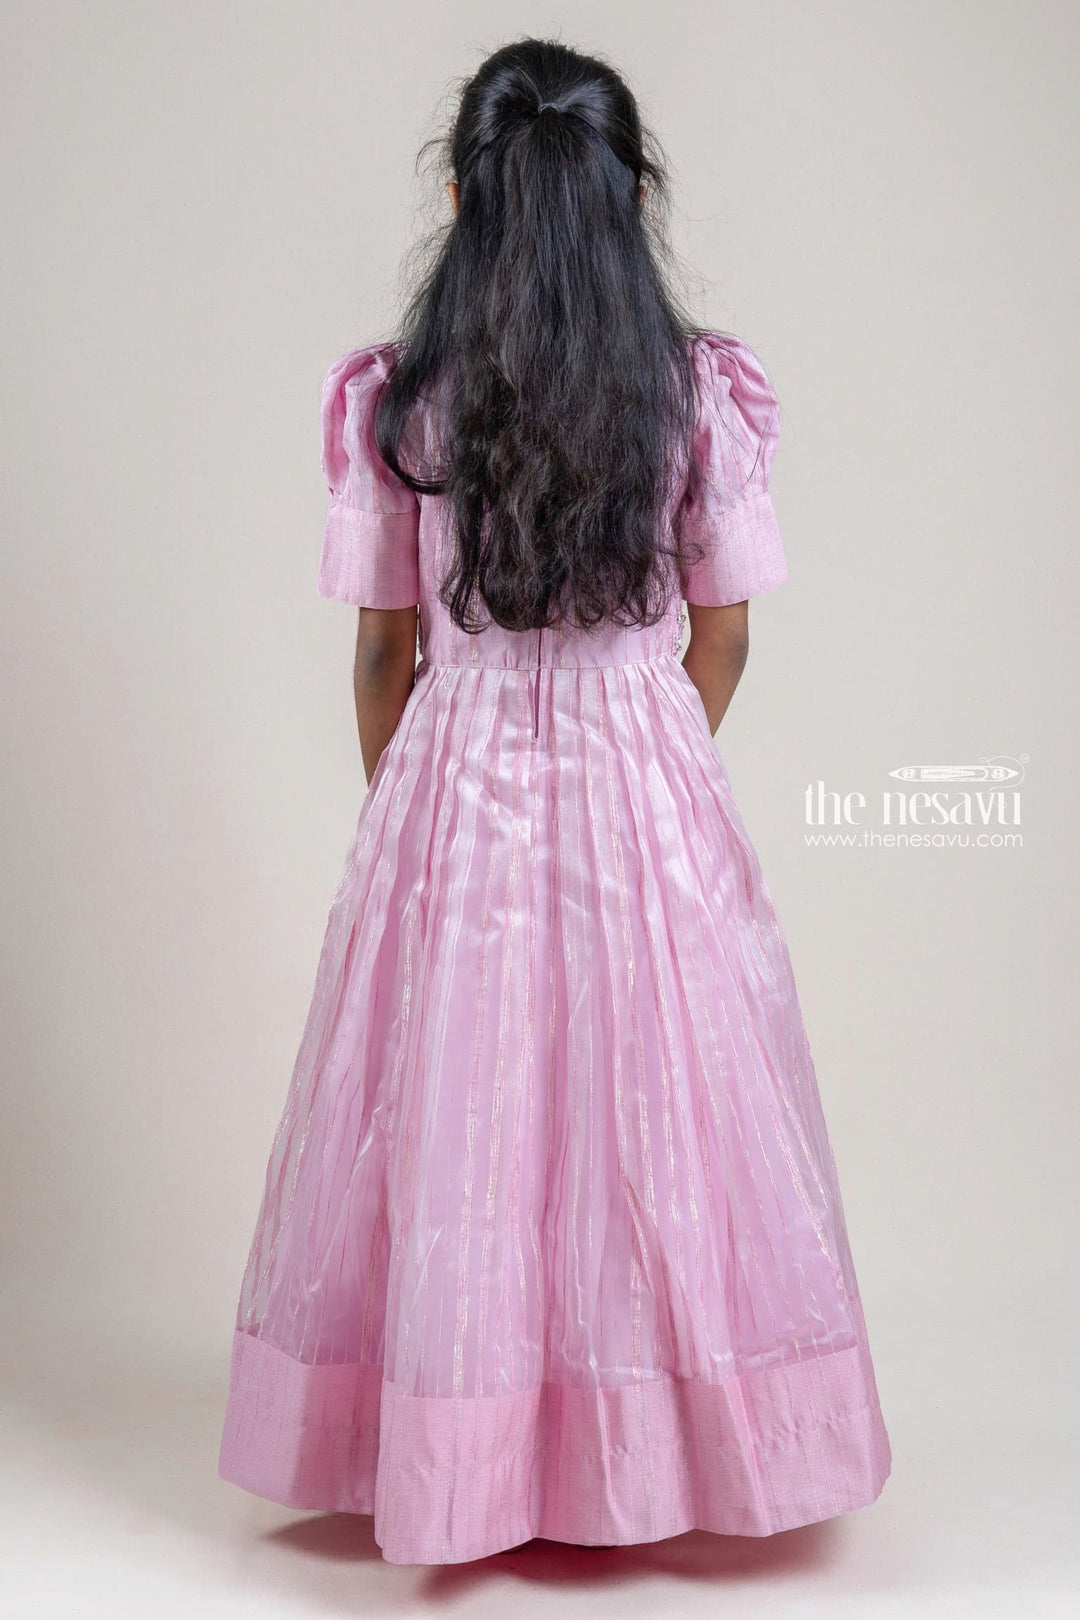 The Nesavu Party Gown Pink Organza Anarkali Dress with Faux Mirror and Rhinestones Embellished Hip Band Nesavu Pink Organza Anarkali Dress with Faux Mirror and Rhinestones Embellished Hip Band | The Nesavu